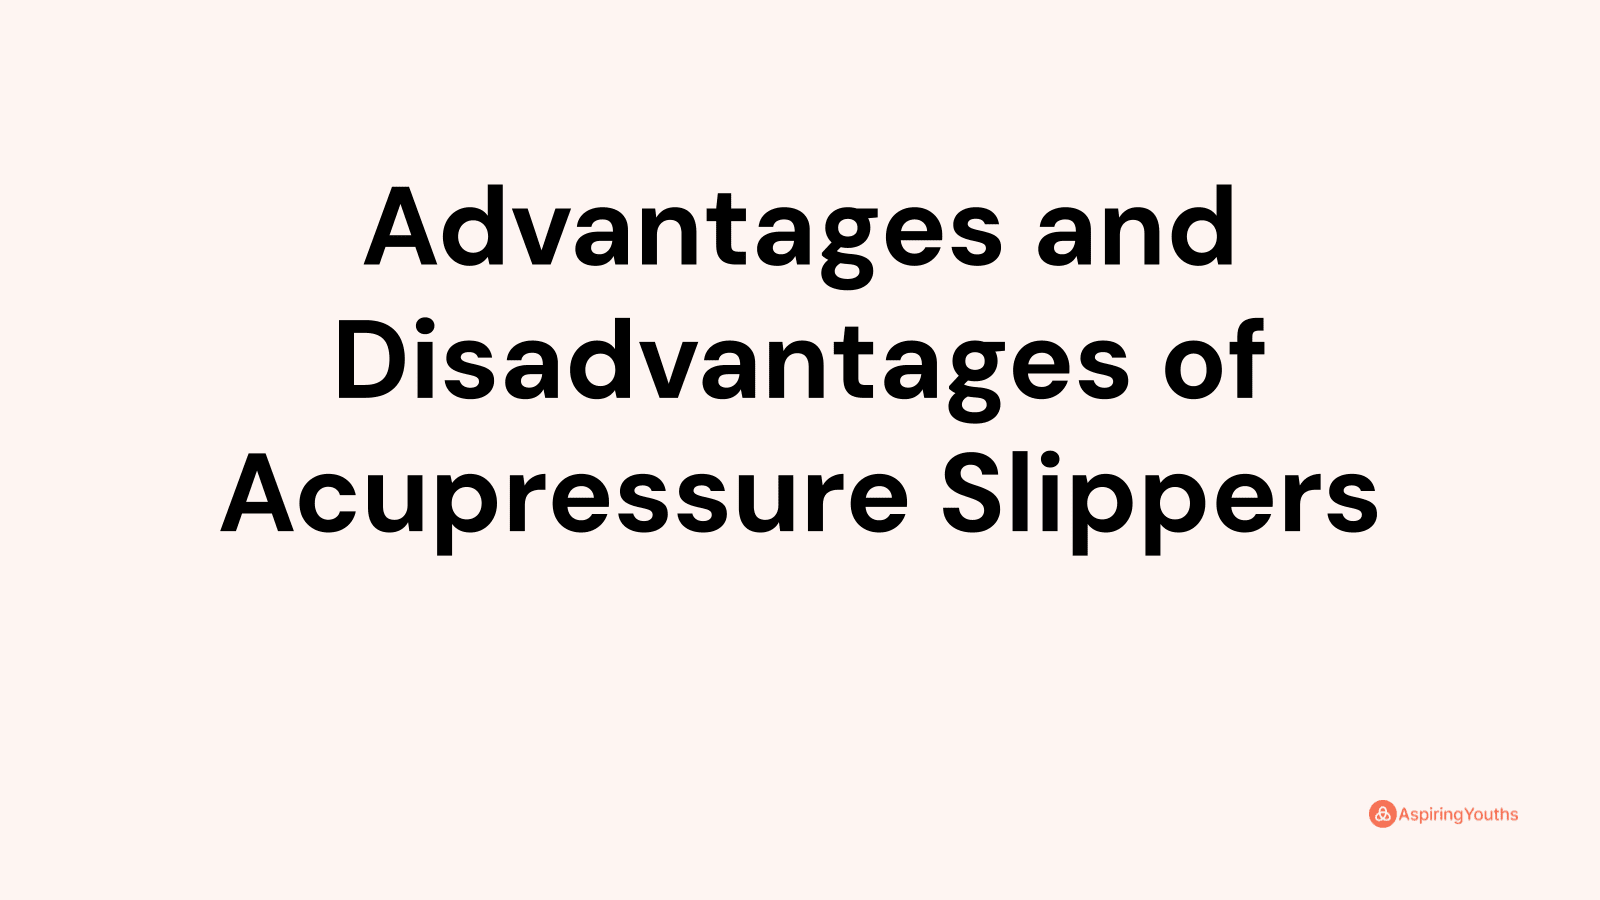 Advantages and disadvantages of Acupressure Slippers